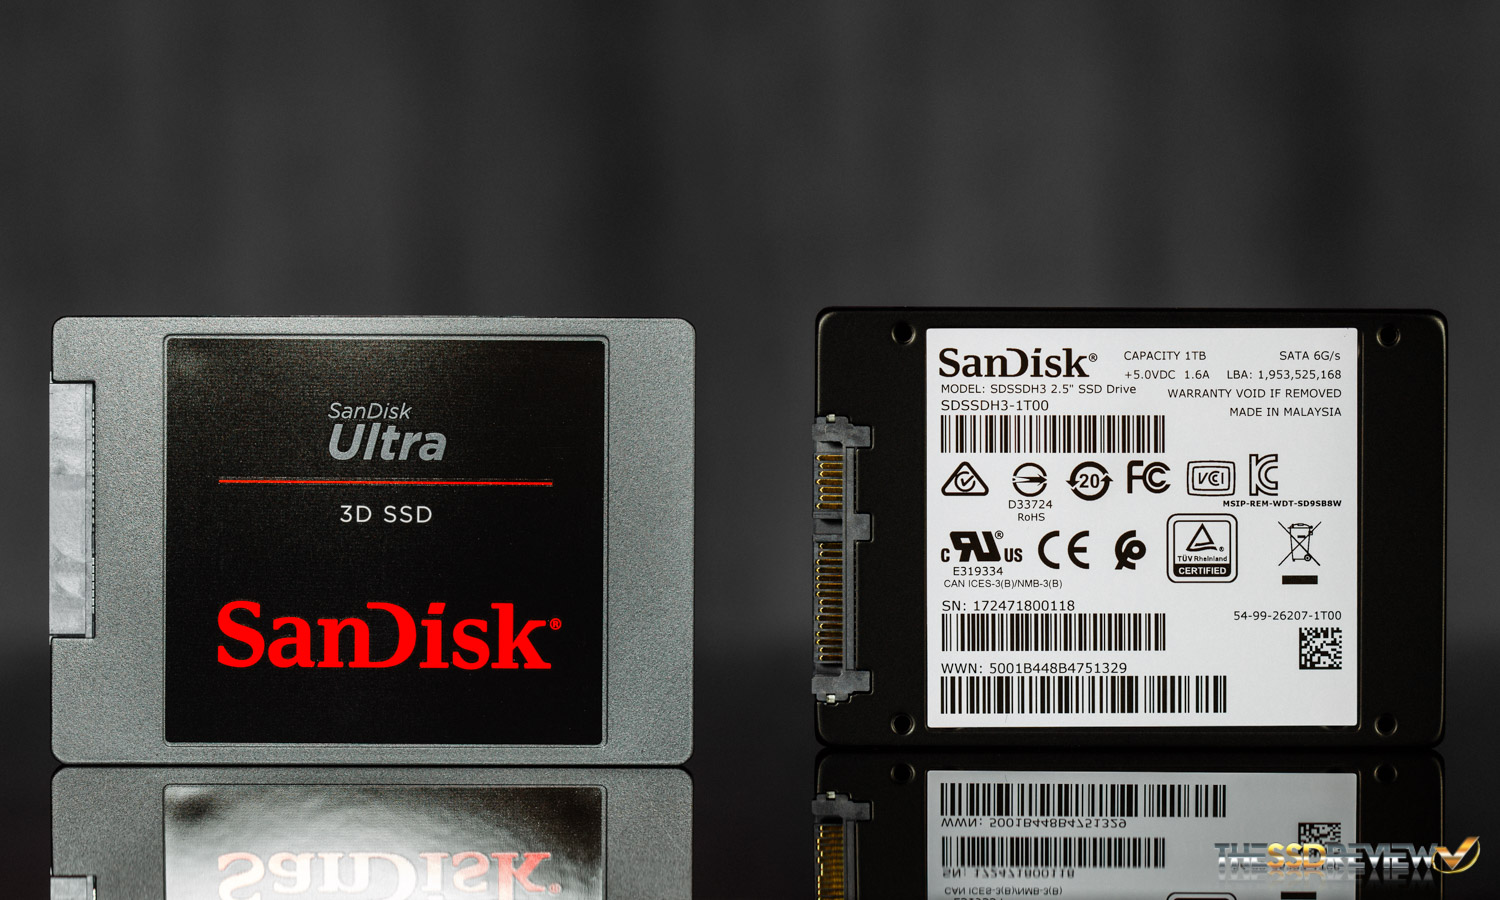 WD Blue 3D SSD & SanDisk Ultra 3D SSD Review (1TB) - Twins That Rival the  Best | The SSD Review